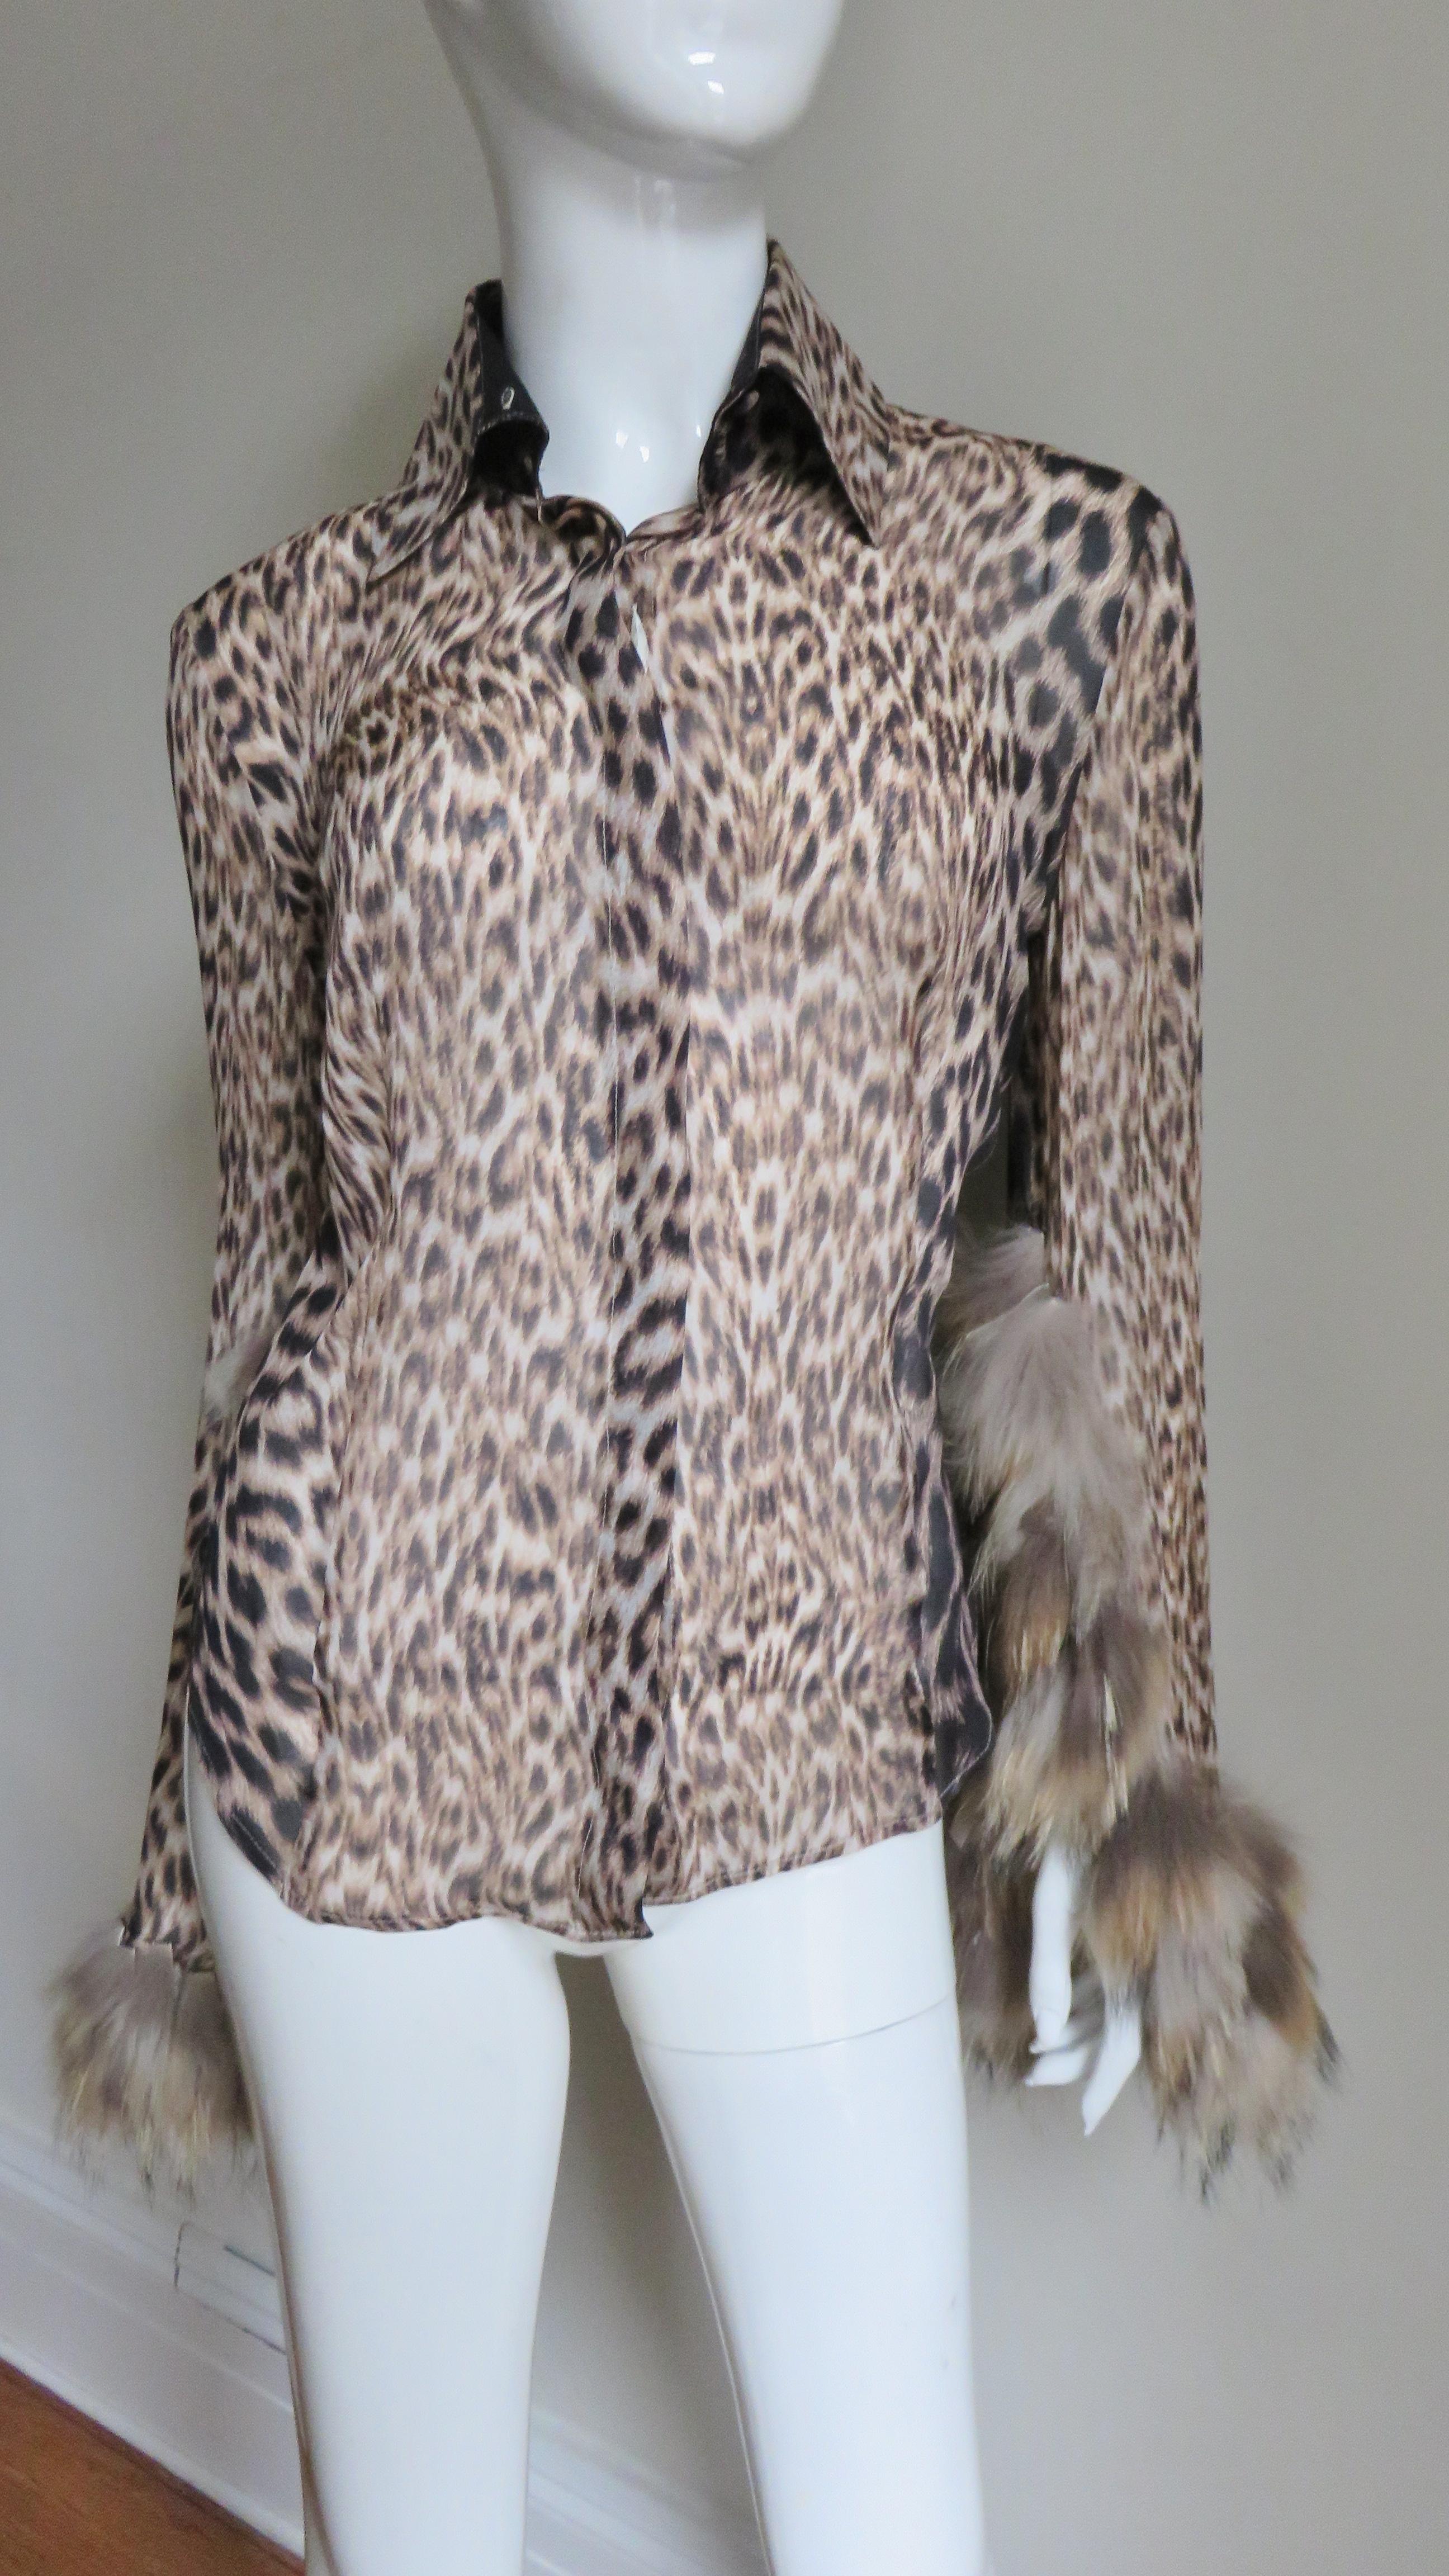 A gorgeous leopard print silk shirt, blouse by Roberto Cavalli.  It has a shirt collar and long bell sleeves highlighted with rows of small strips of fox fur at the bottom. There is a front placket hiding small self covered buttons. Stunning!
Fits